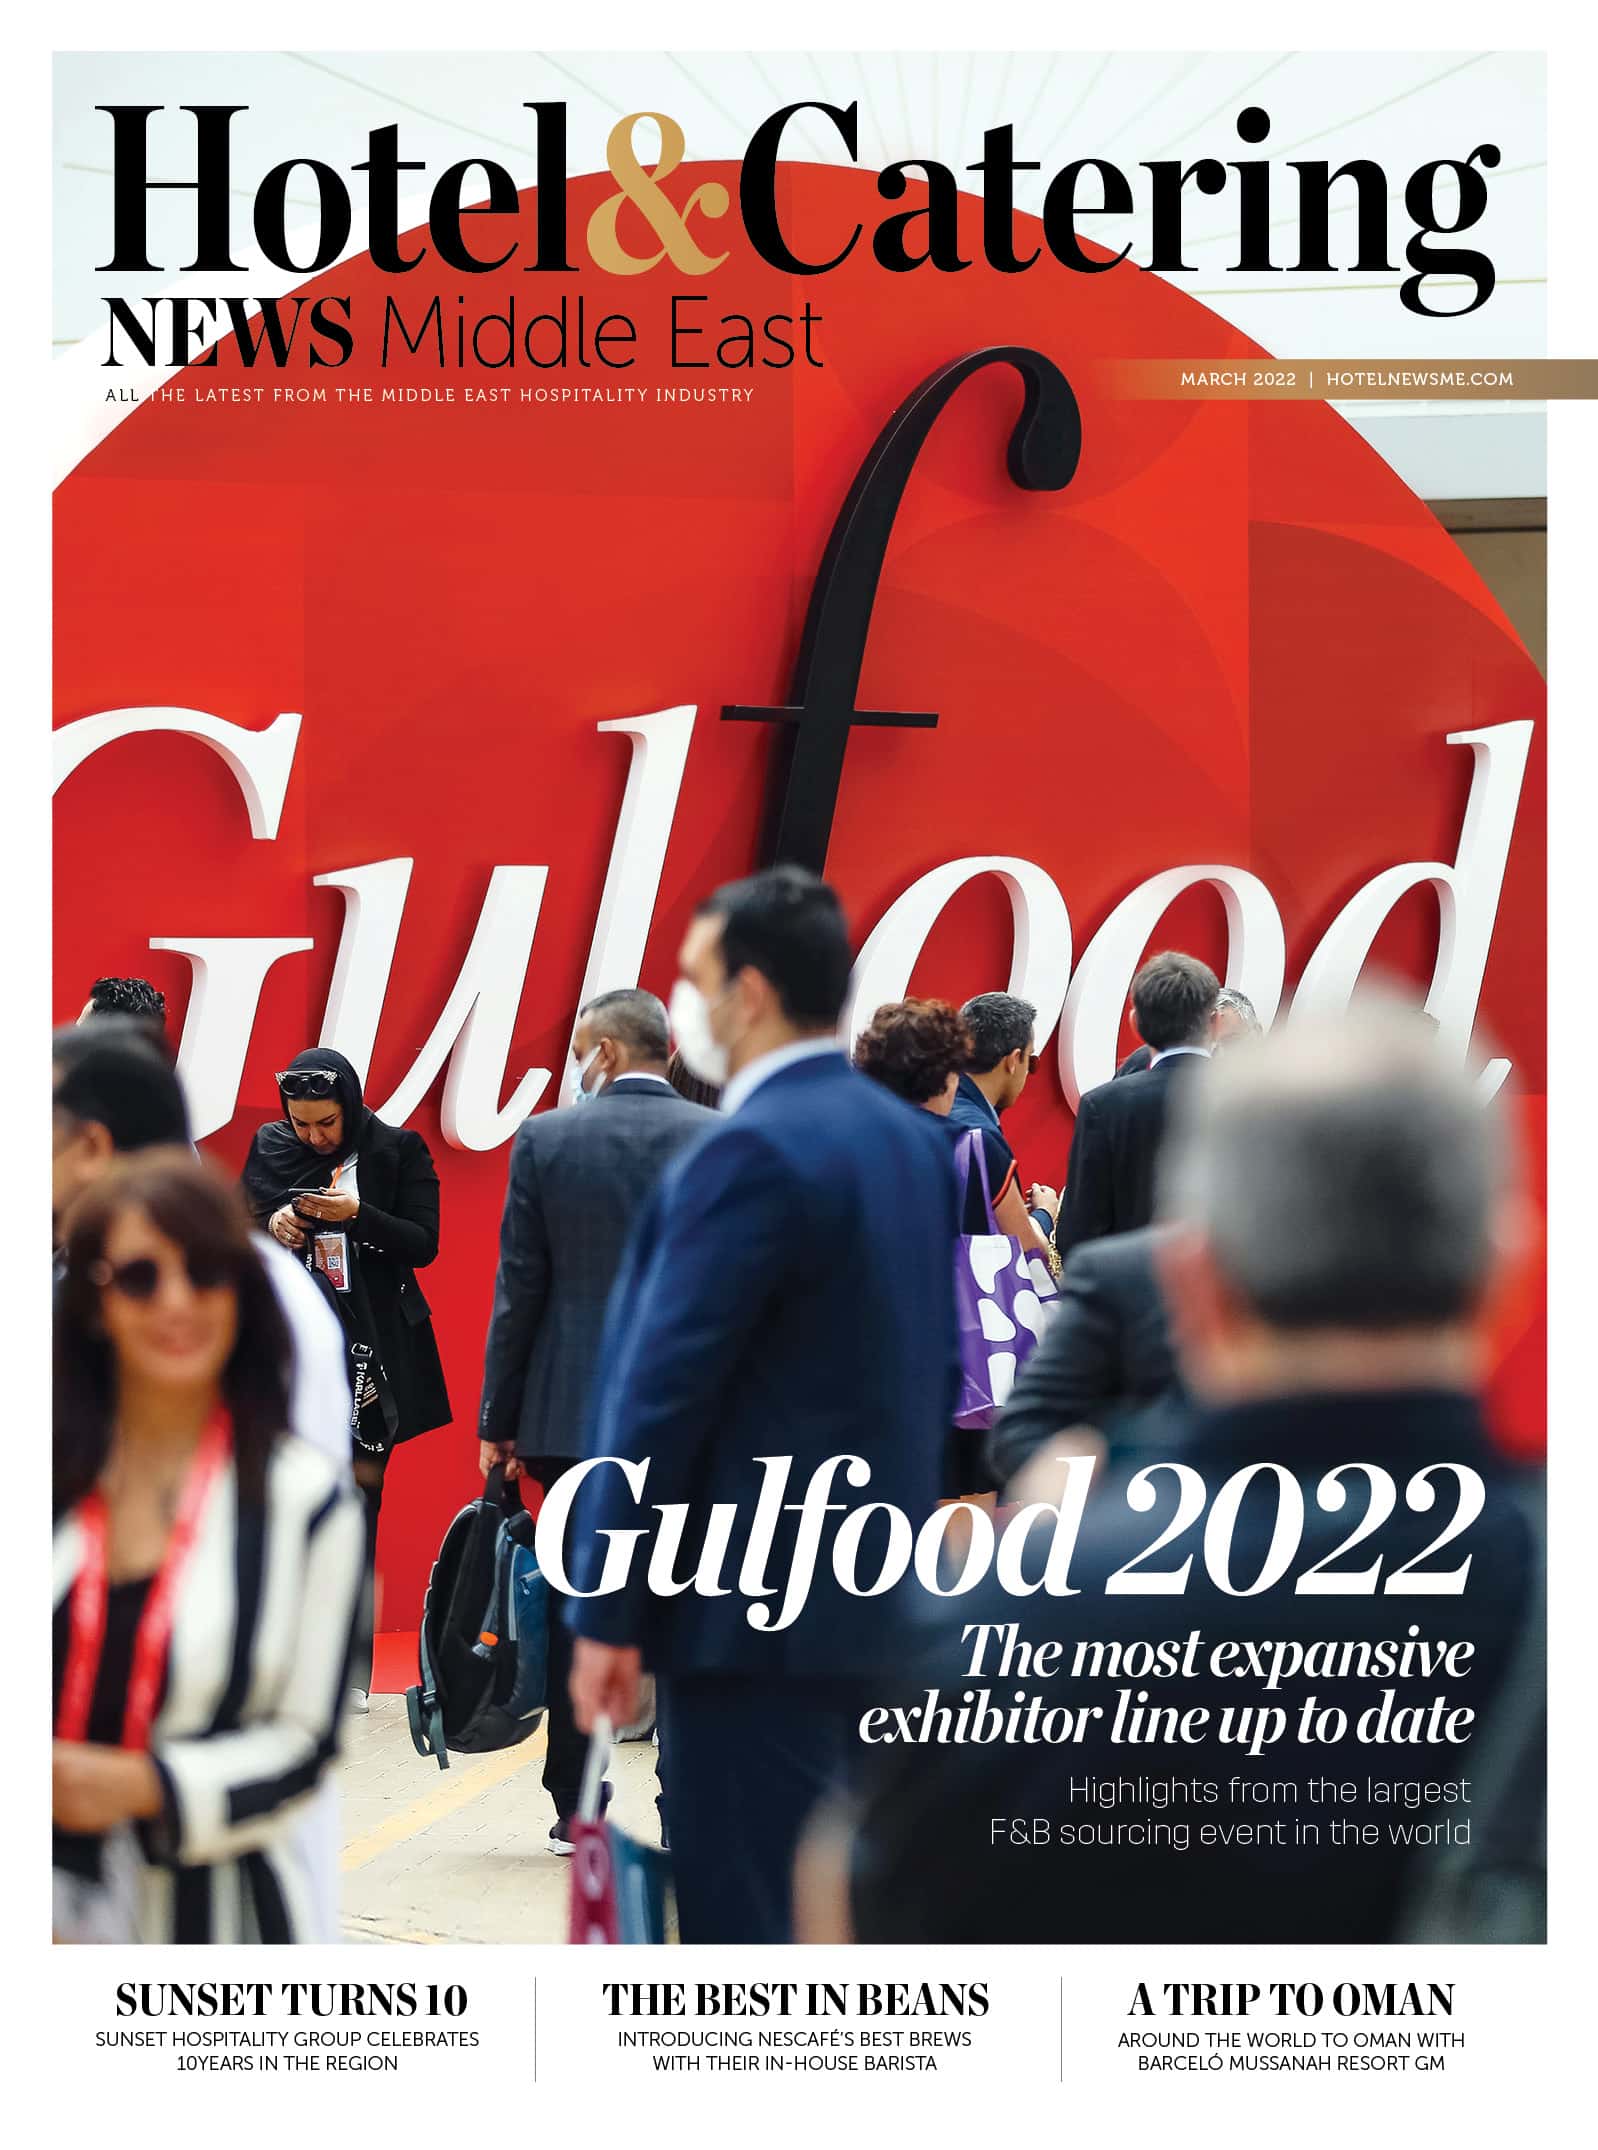 https://www.hotelnewsme.com/digital-magazine/hotel-catering-news-middle-east-march-2022-issue/